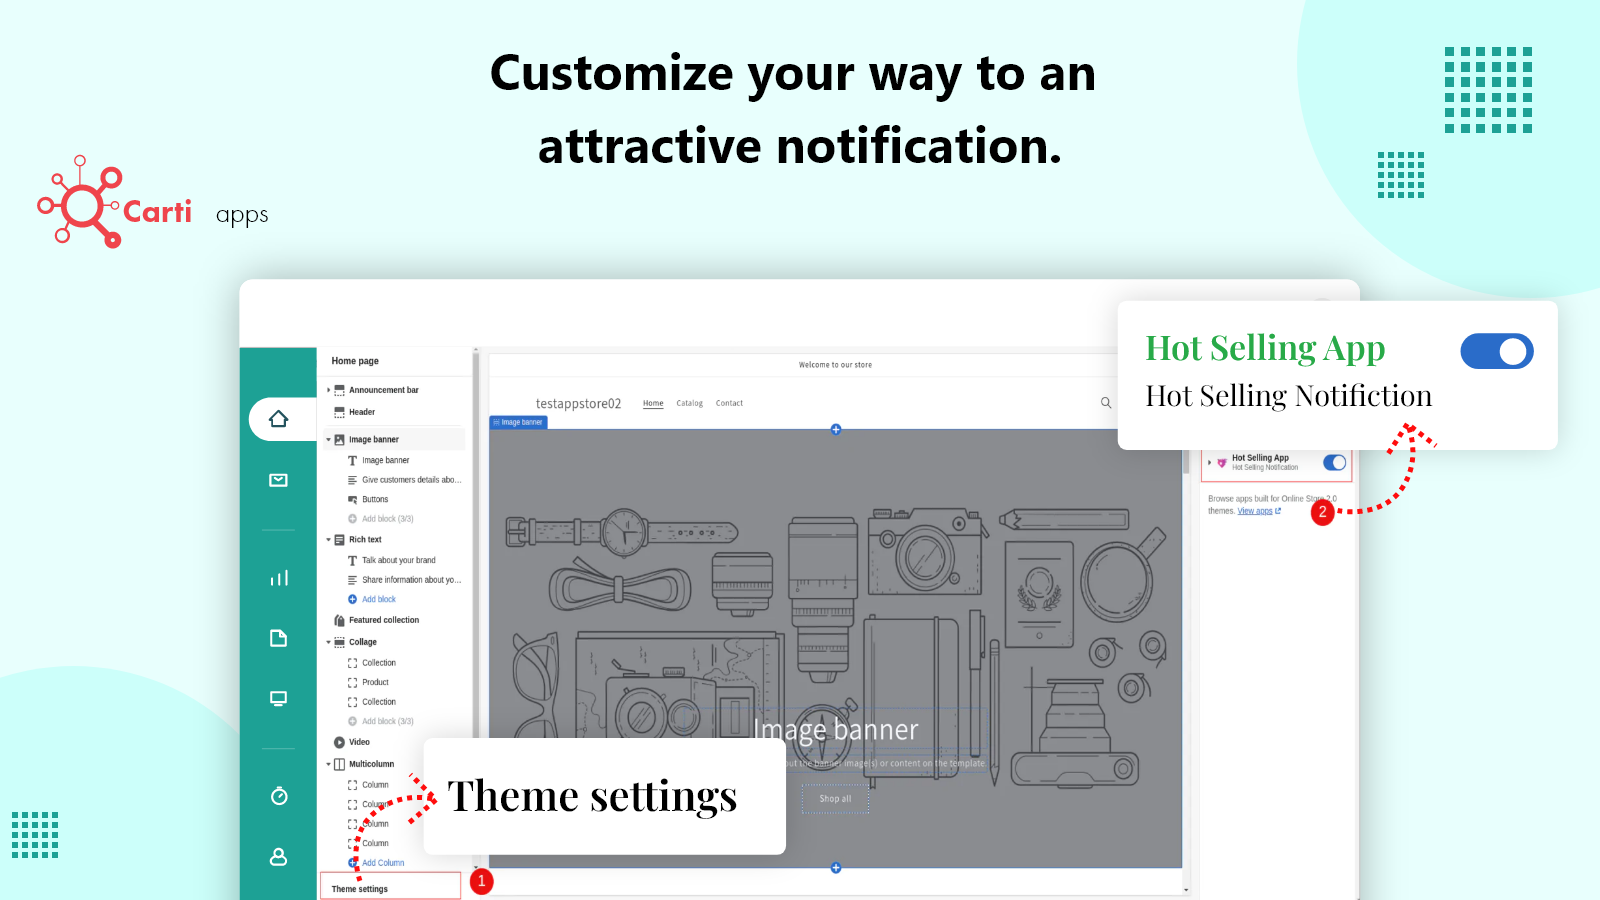 Make an attractive notification.